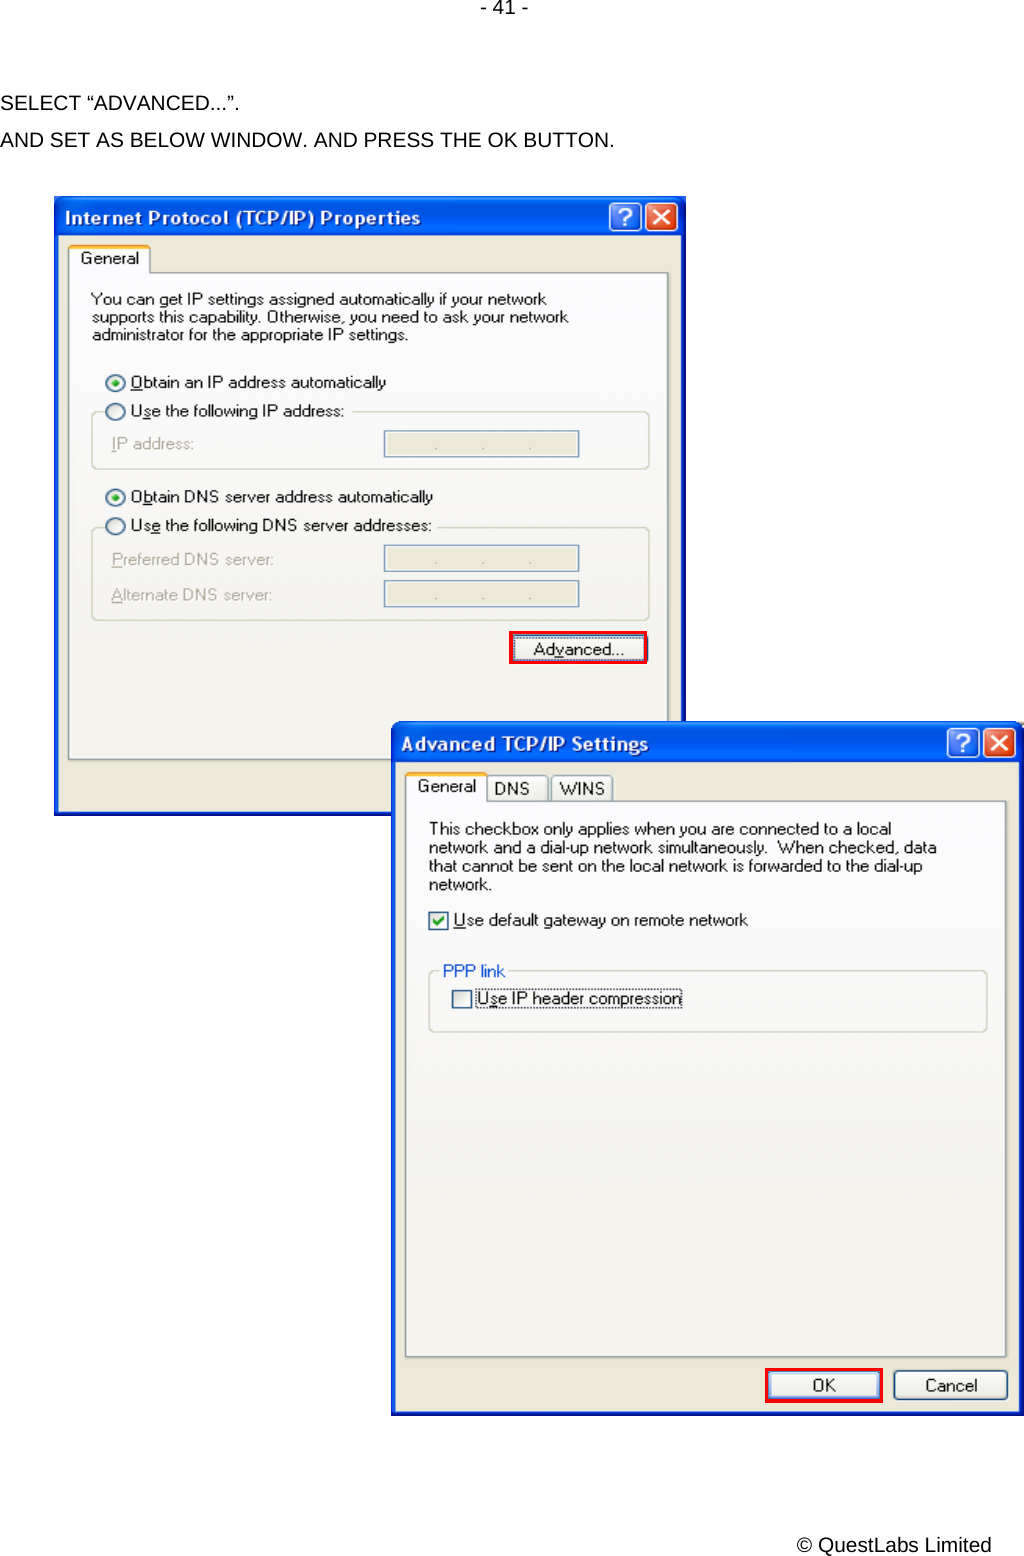 - 41 -           © QuestLabs Limited SELECT “ADVANCED...”. AND SET AS BELOW WINDOW. AND PRESS THE OK BUTTON.                                   